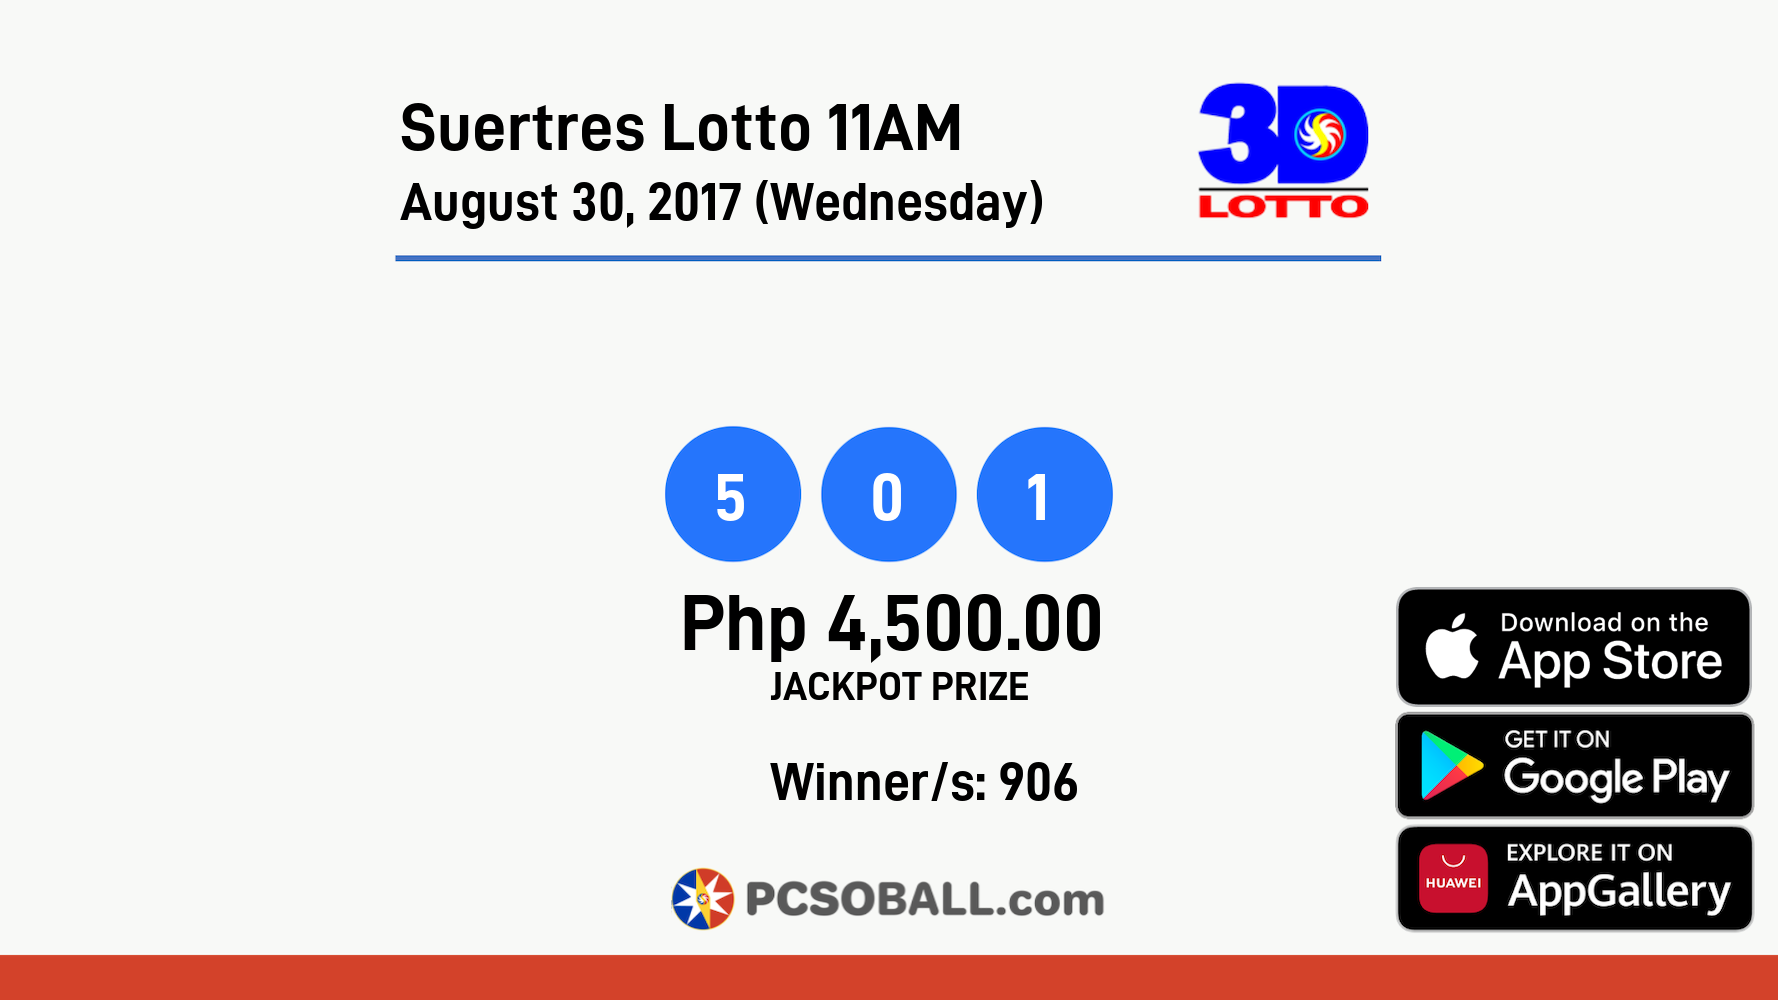 Suertres Lotto 11AM August 30, 2017 (Wednesday) Result